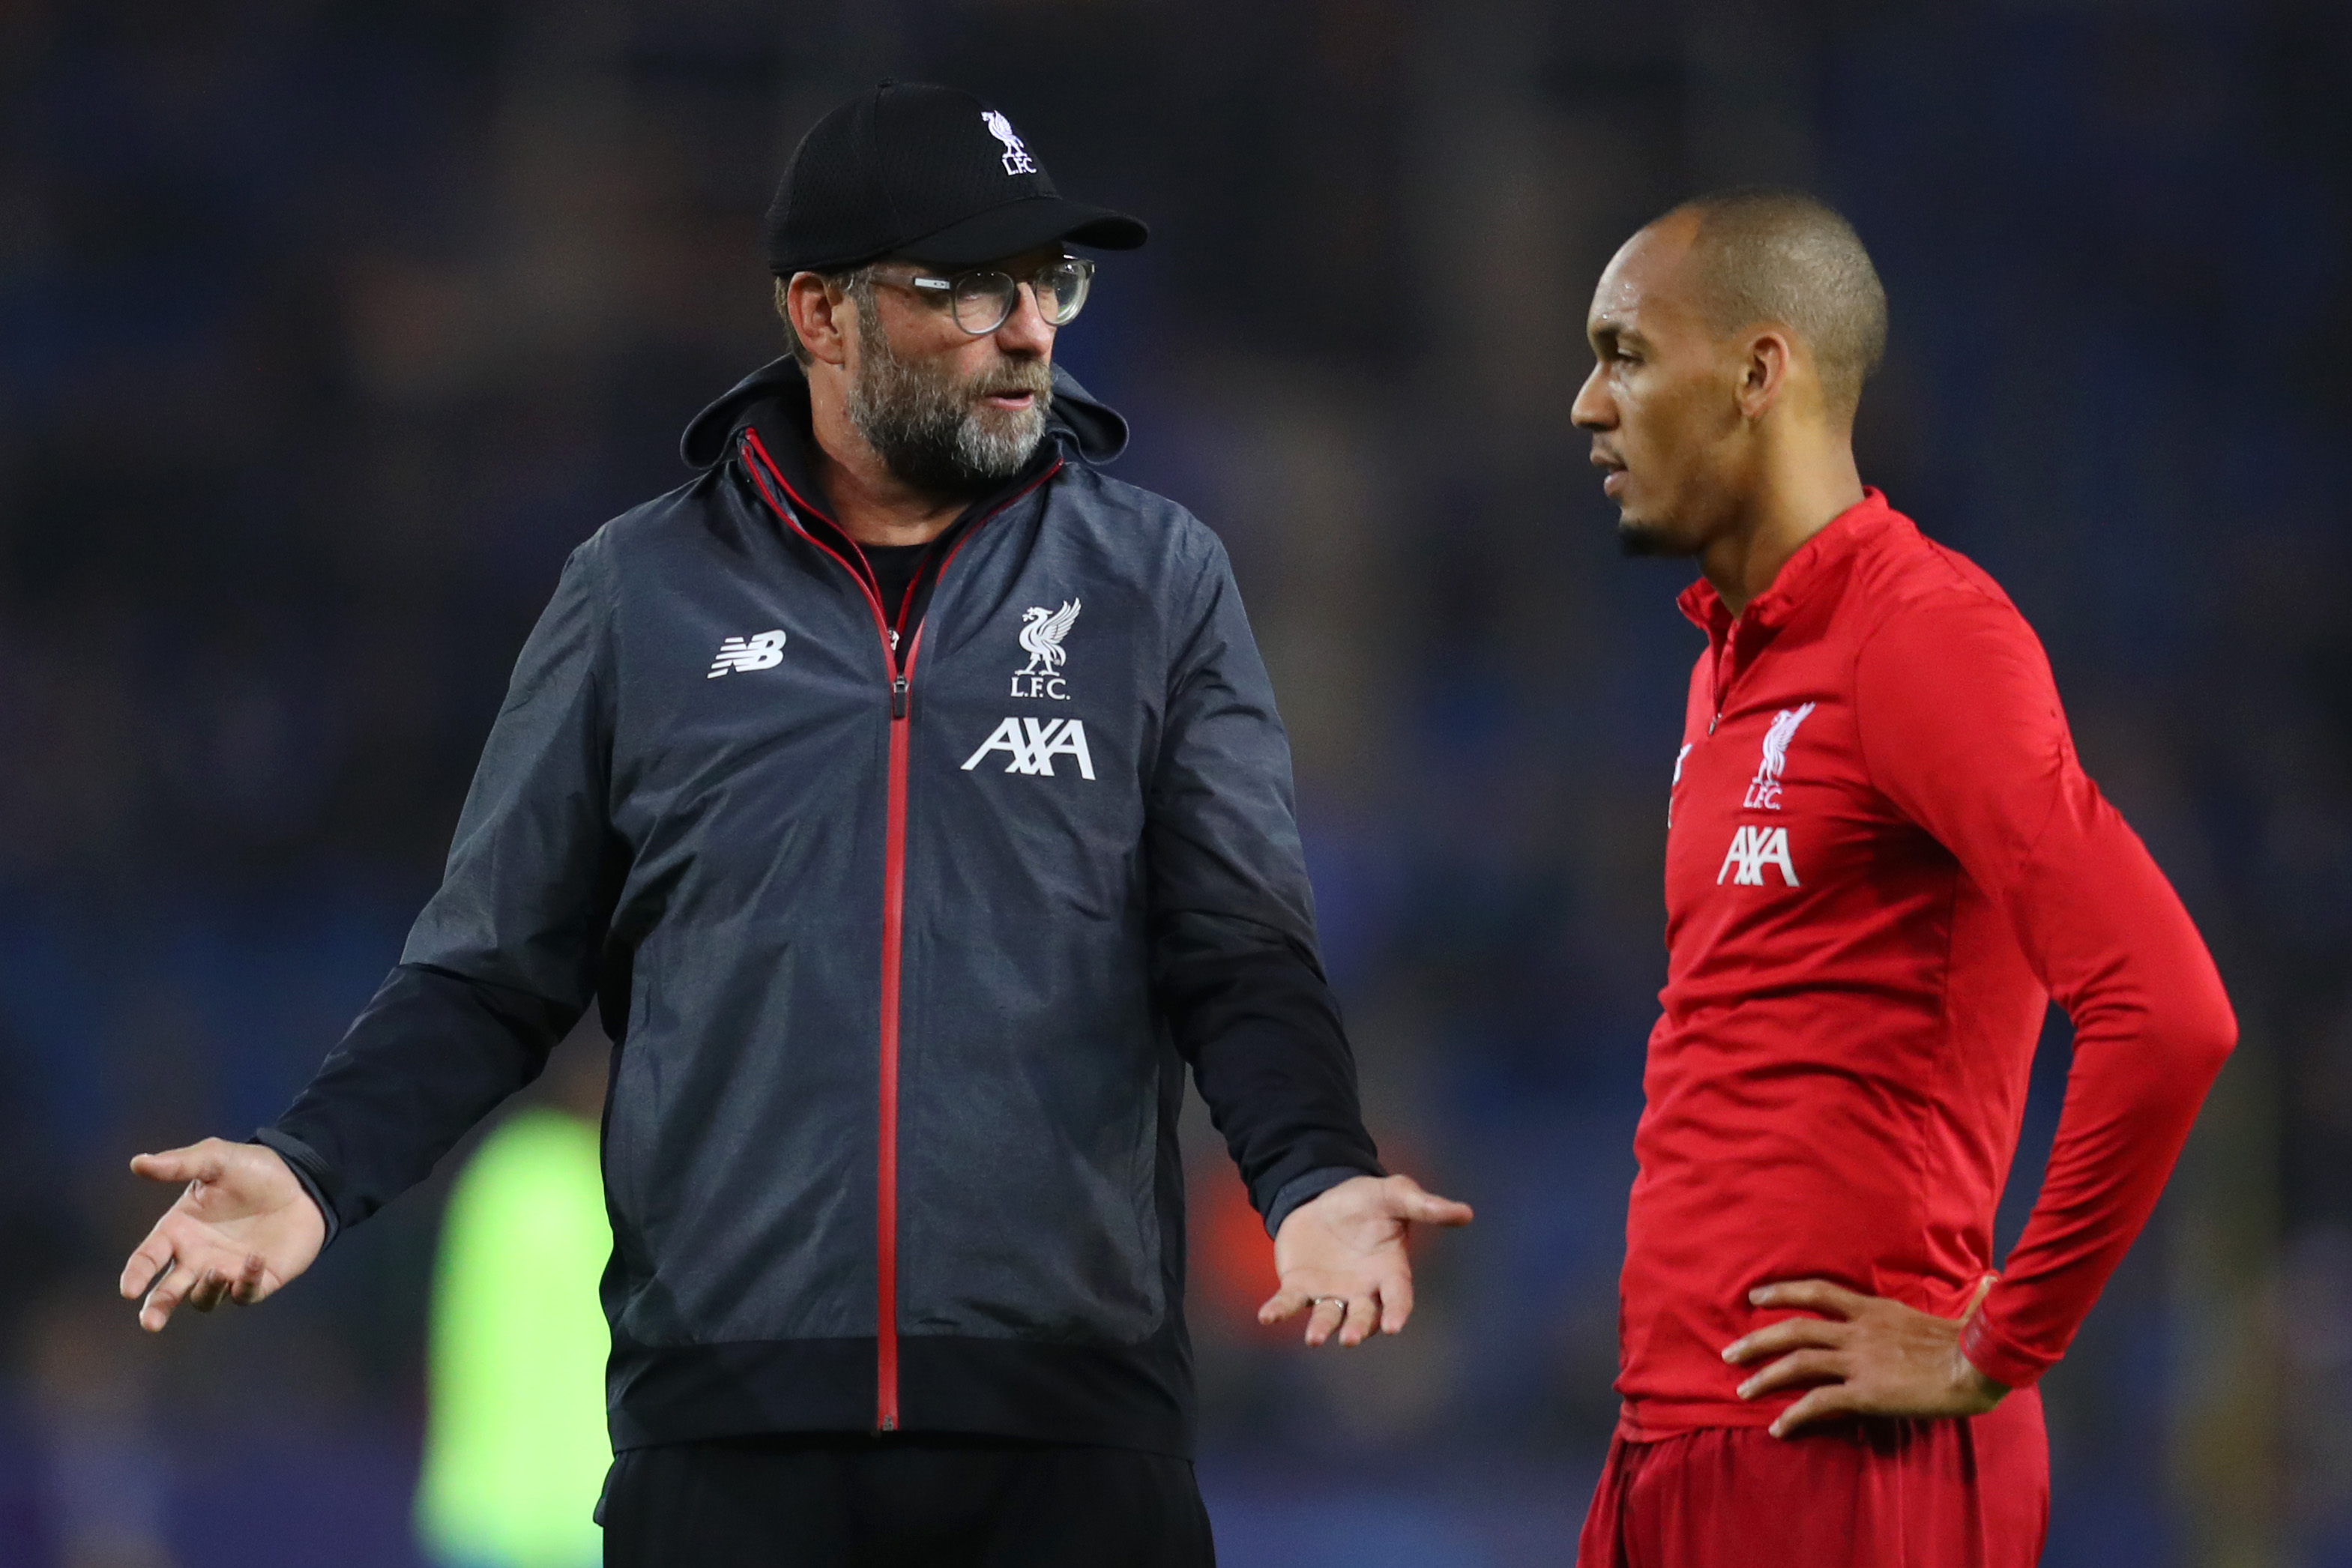 Fabinho is available after missing the game against Burnley. (Photo by Catherine Ivill/Getty Images)